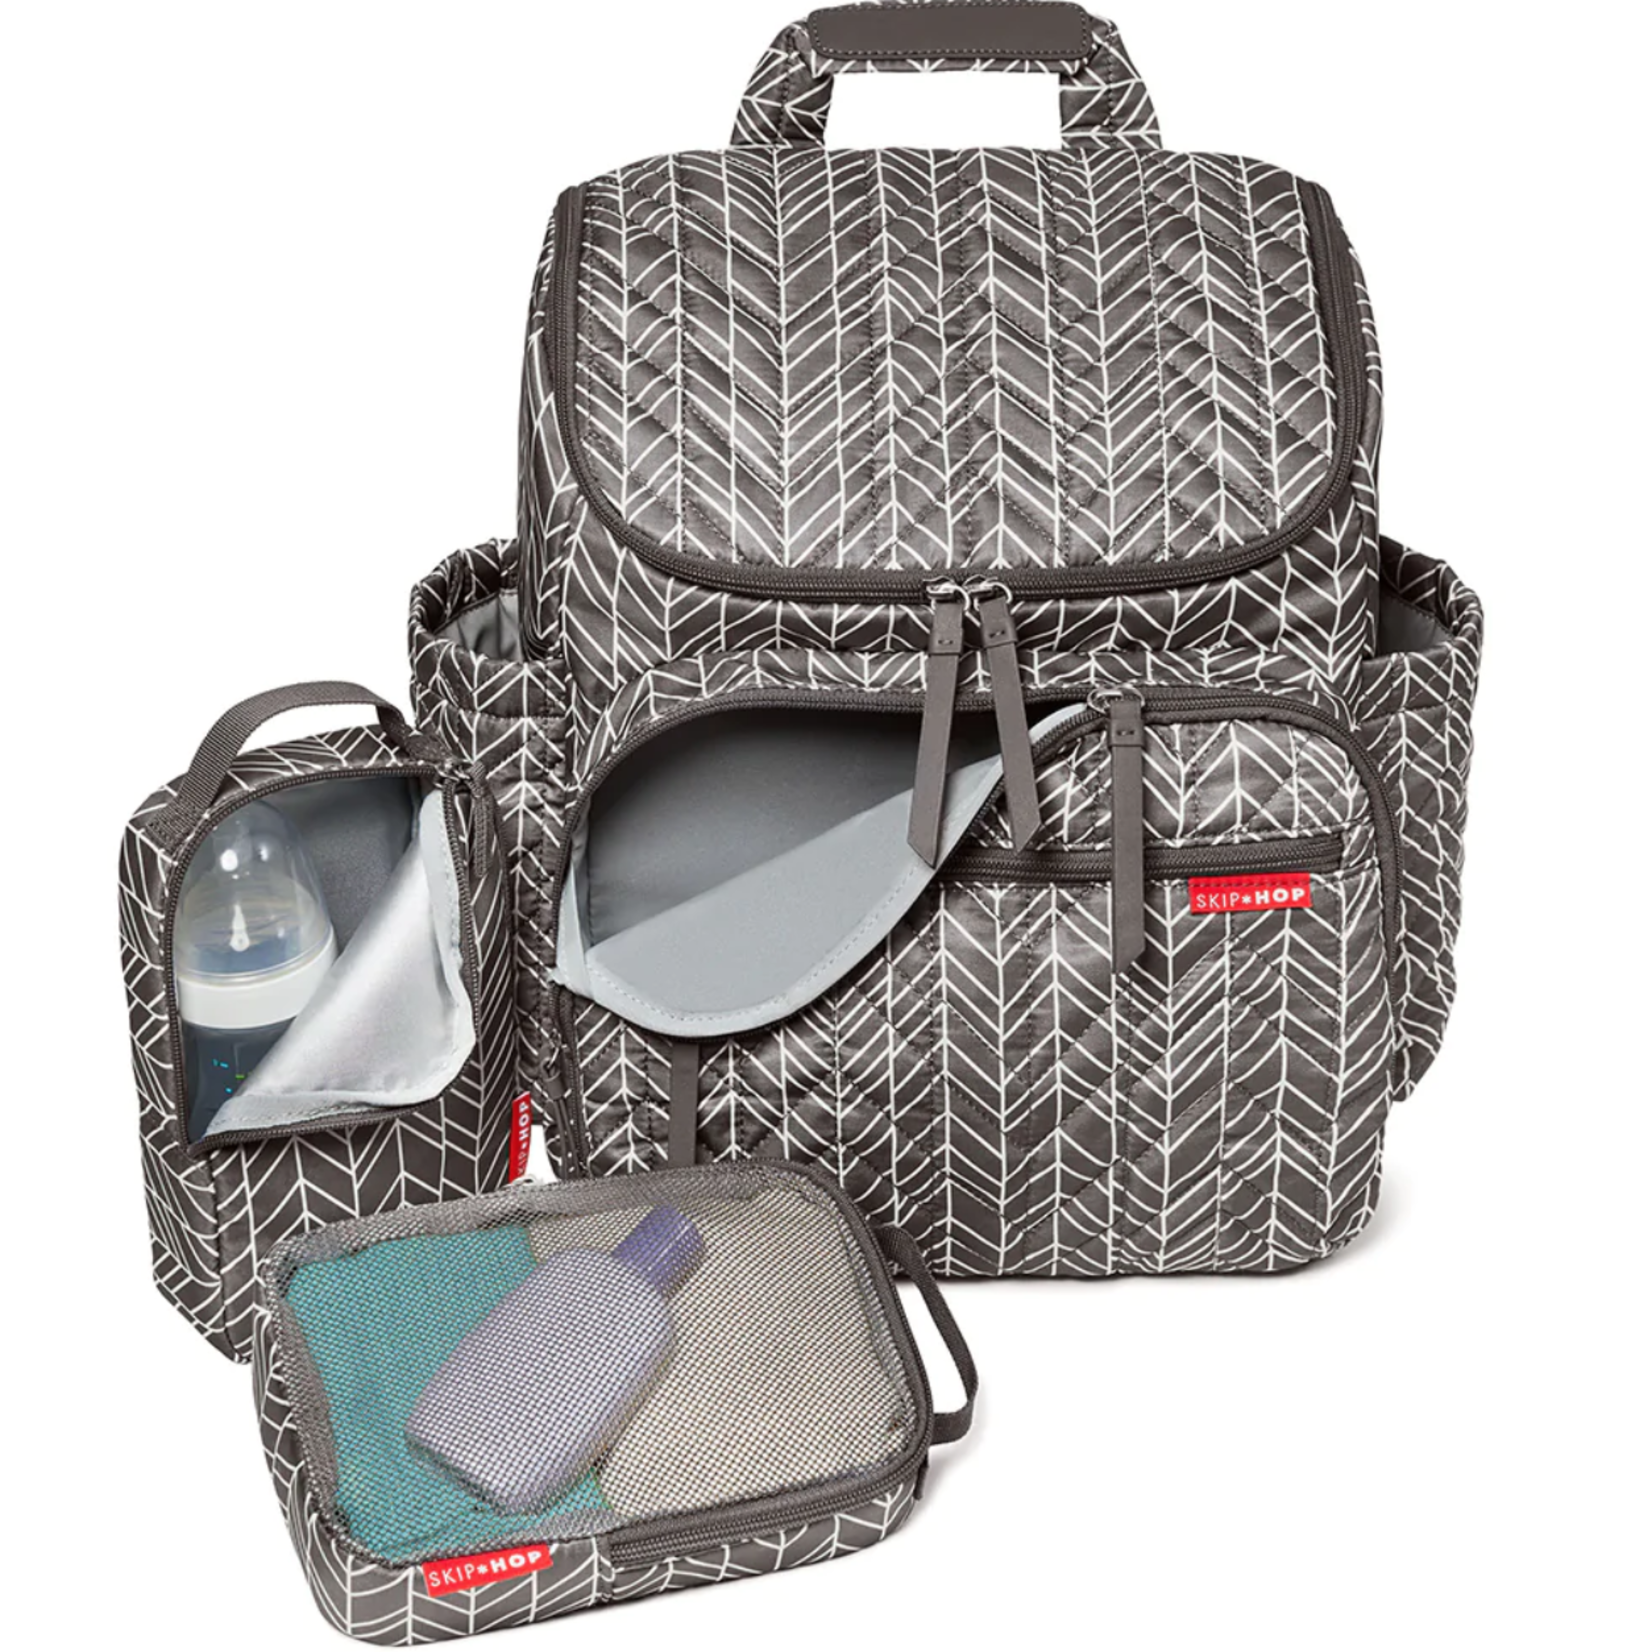 Skip Hop Forma Nappy Backpack - Grey Feather